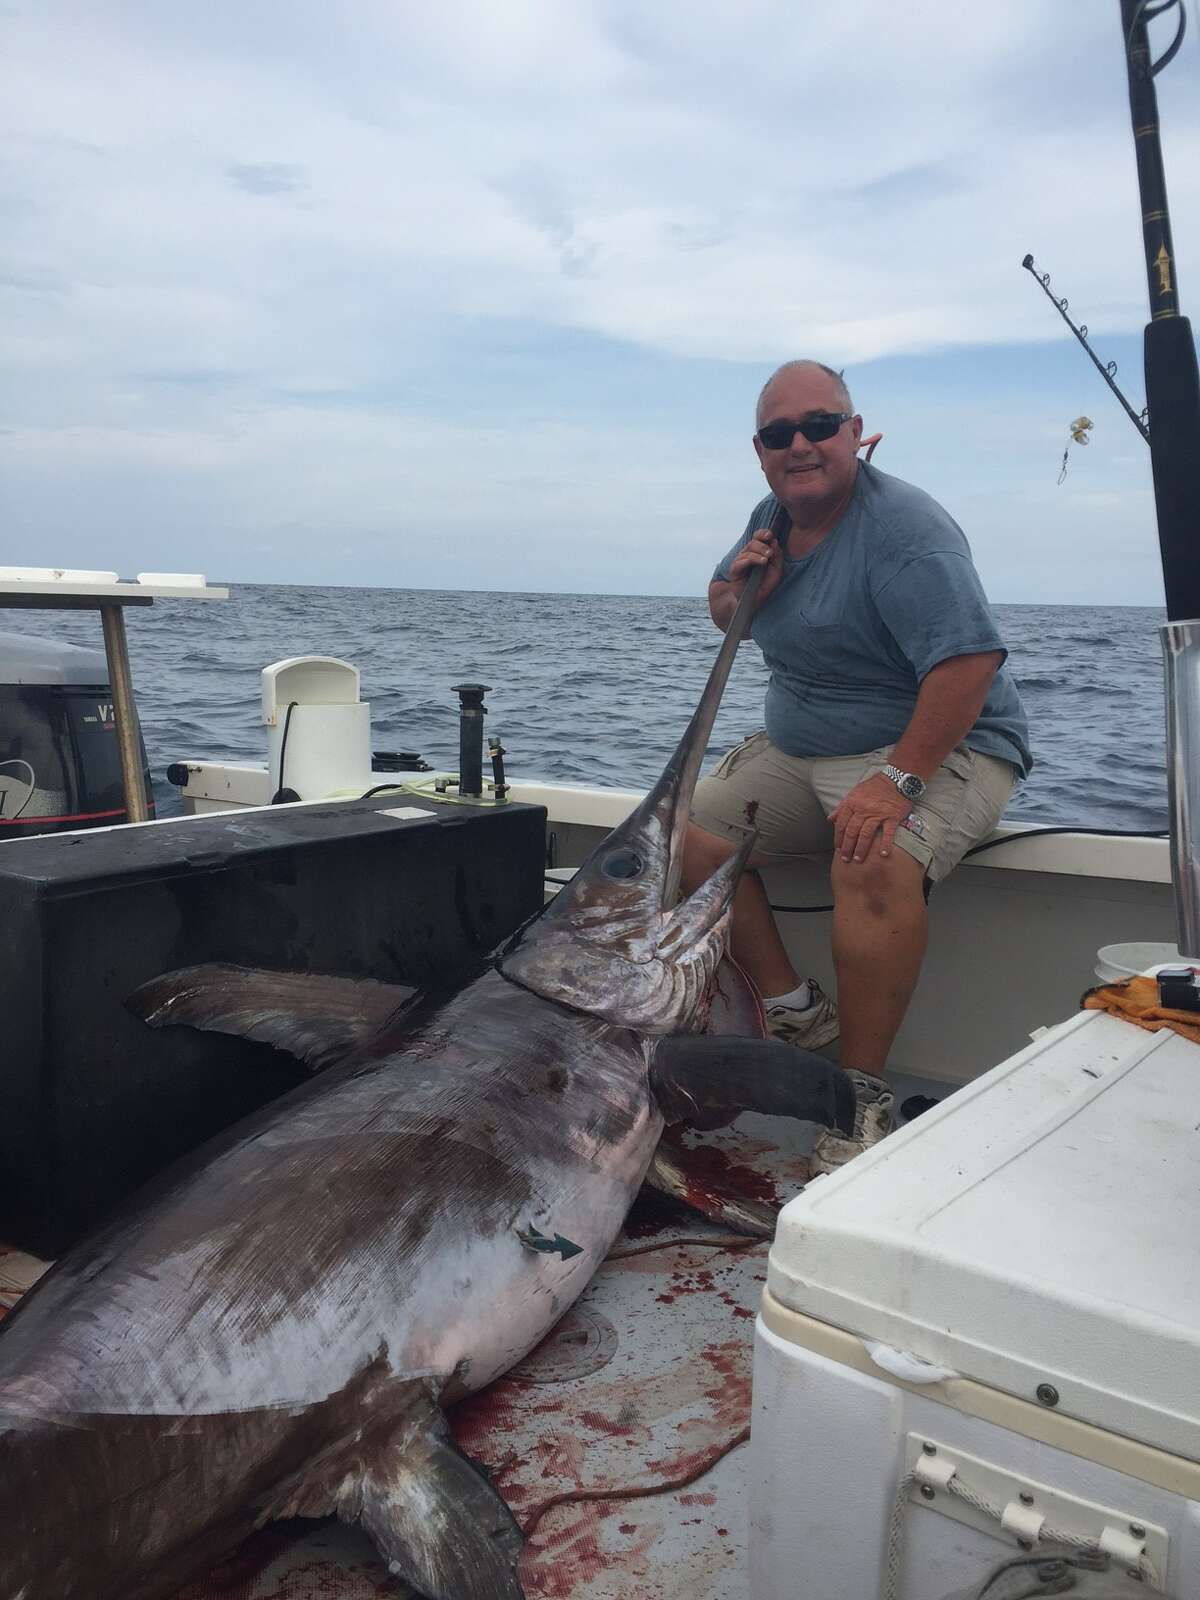 Emil J. Krejci Jr., 54, set a new state record with his 412-pound, 97-inch swordfish catch June 29 when he was fishing in the Gulf of Mexico.